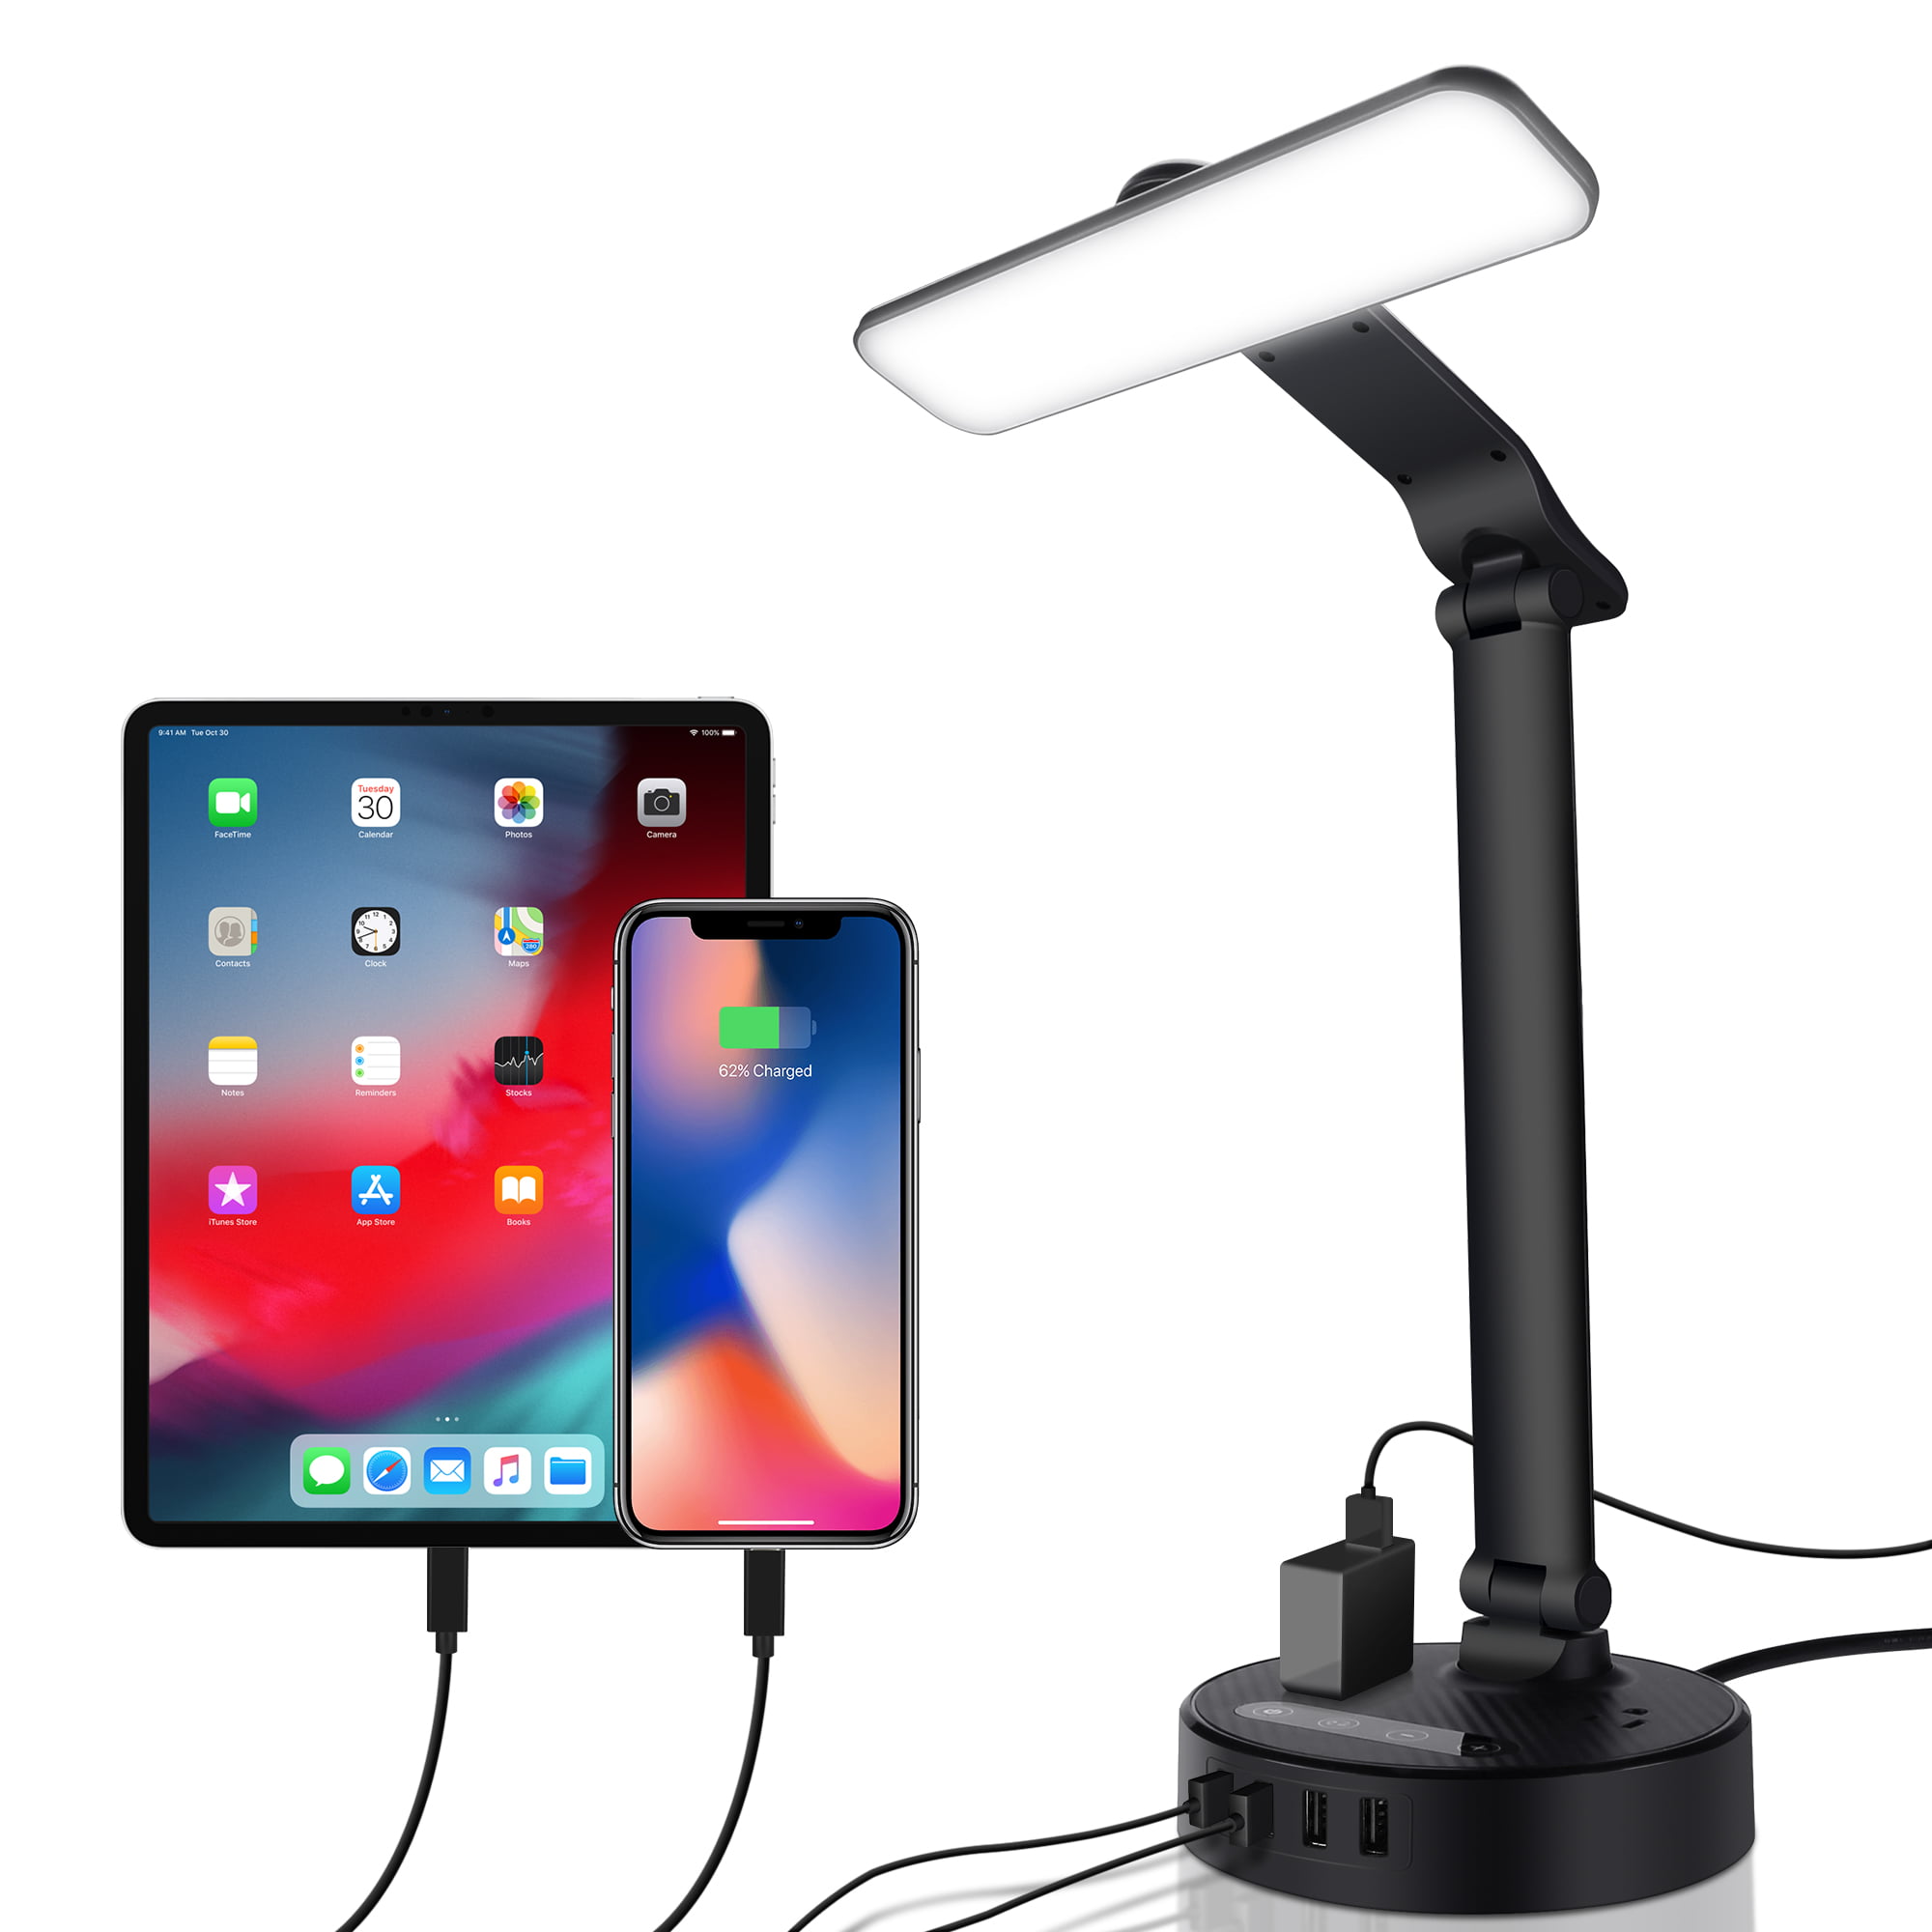 USB Powered LED Night light Desk Book Reading Ceiling lamp With Switch ON OFF 